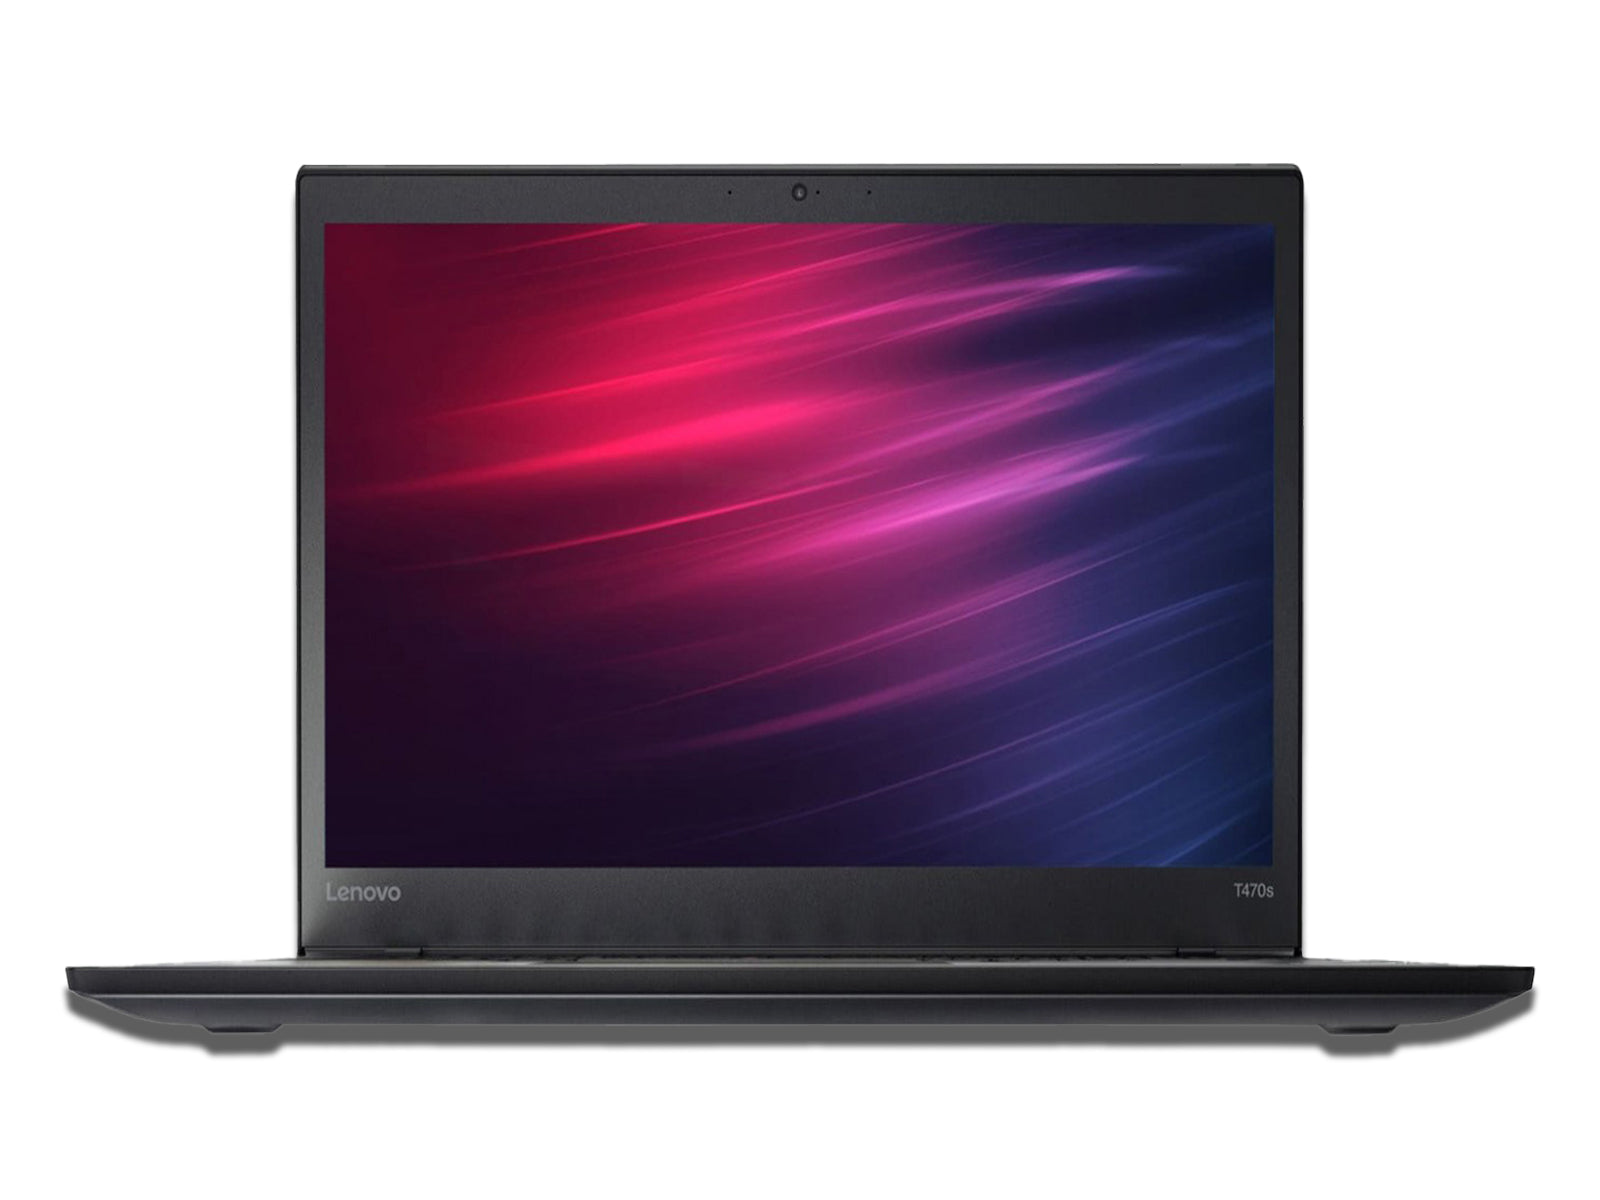 Image of the Lenovo T470s Laptop on The White Background